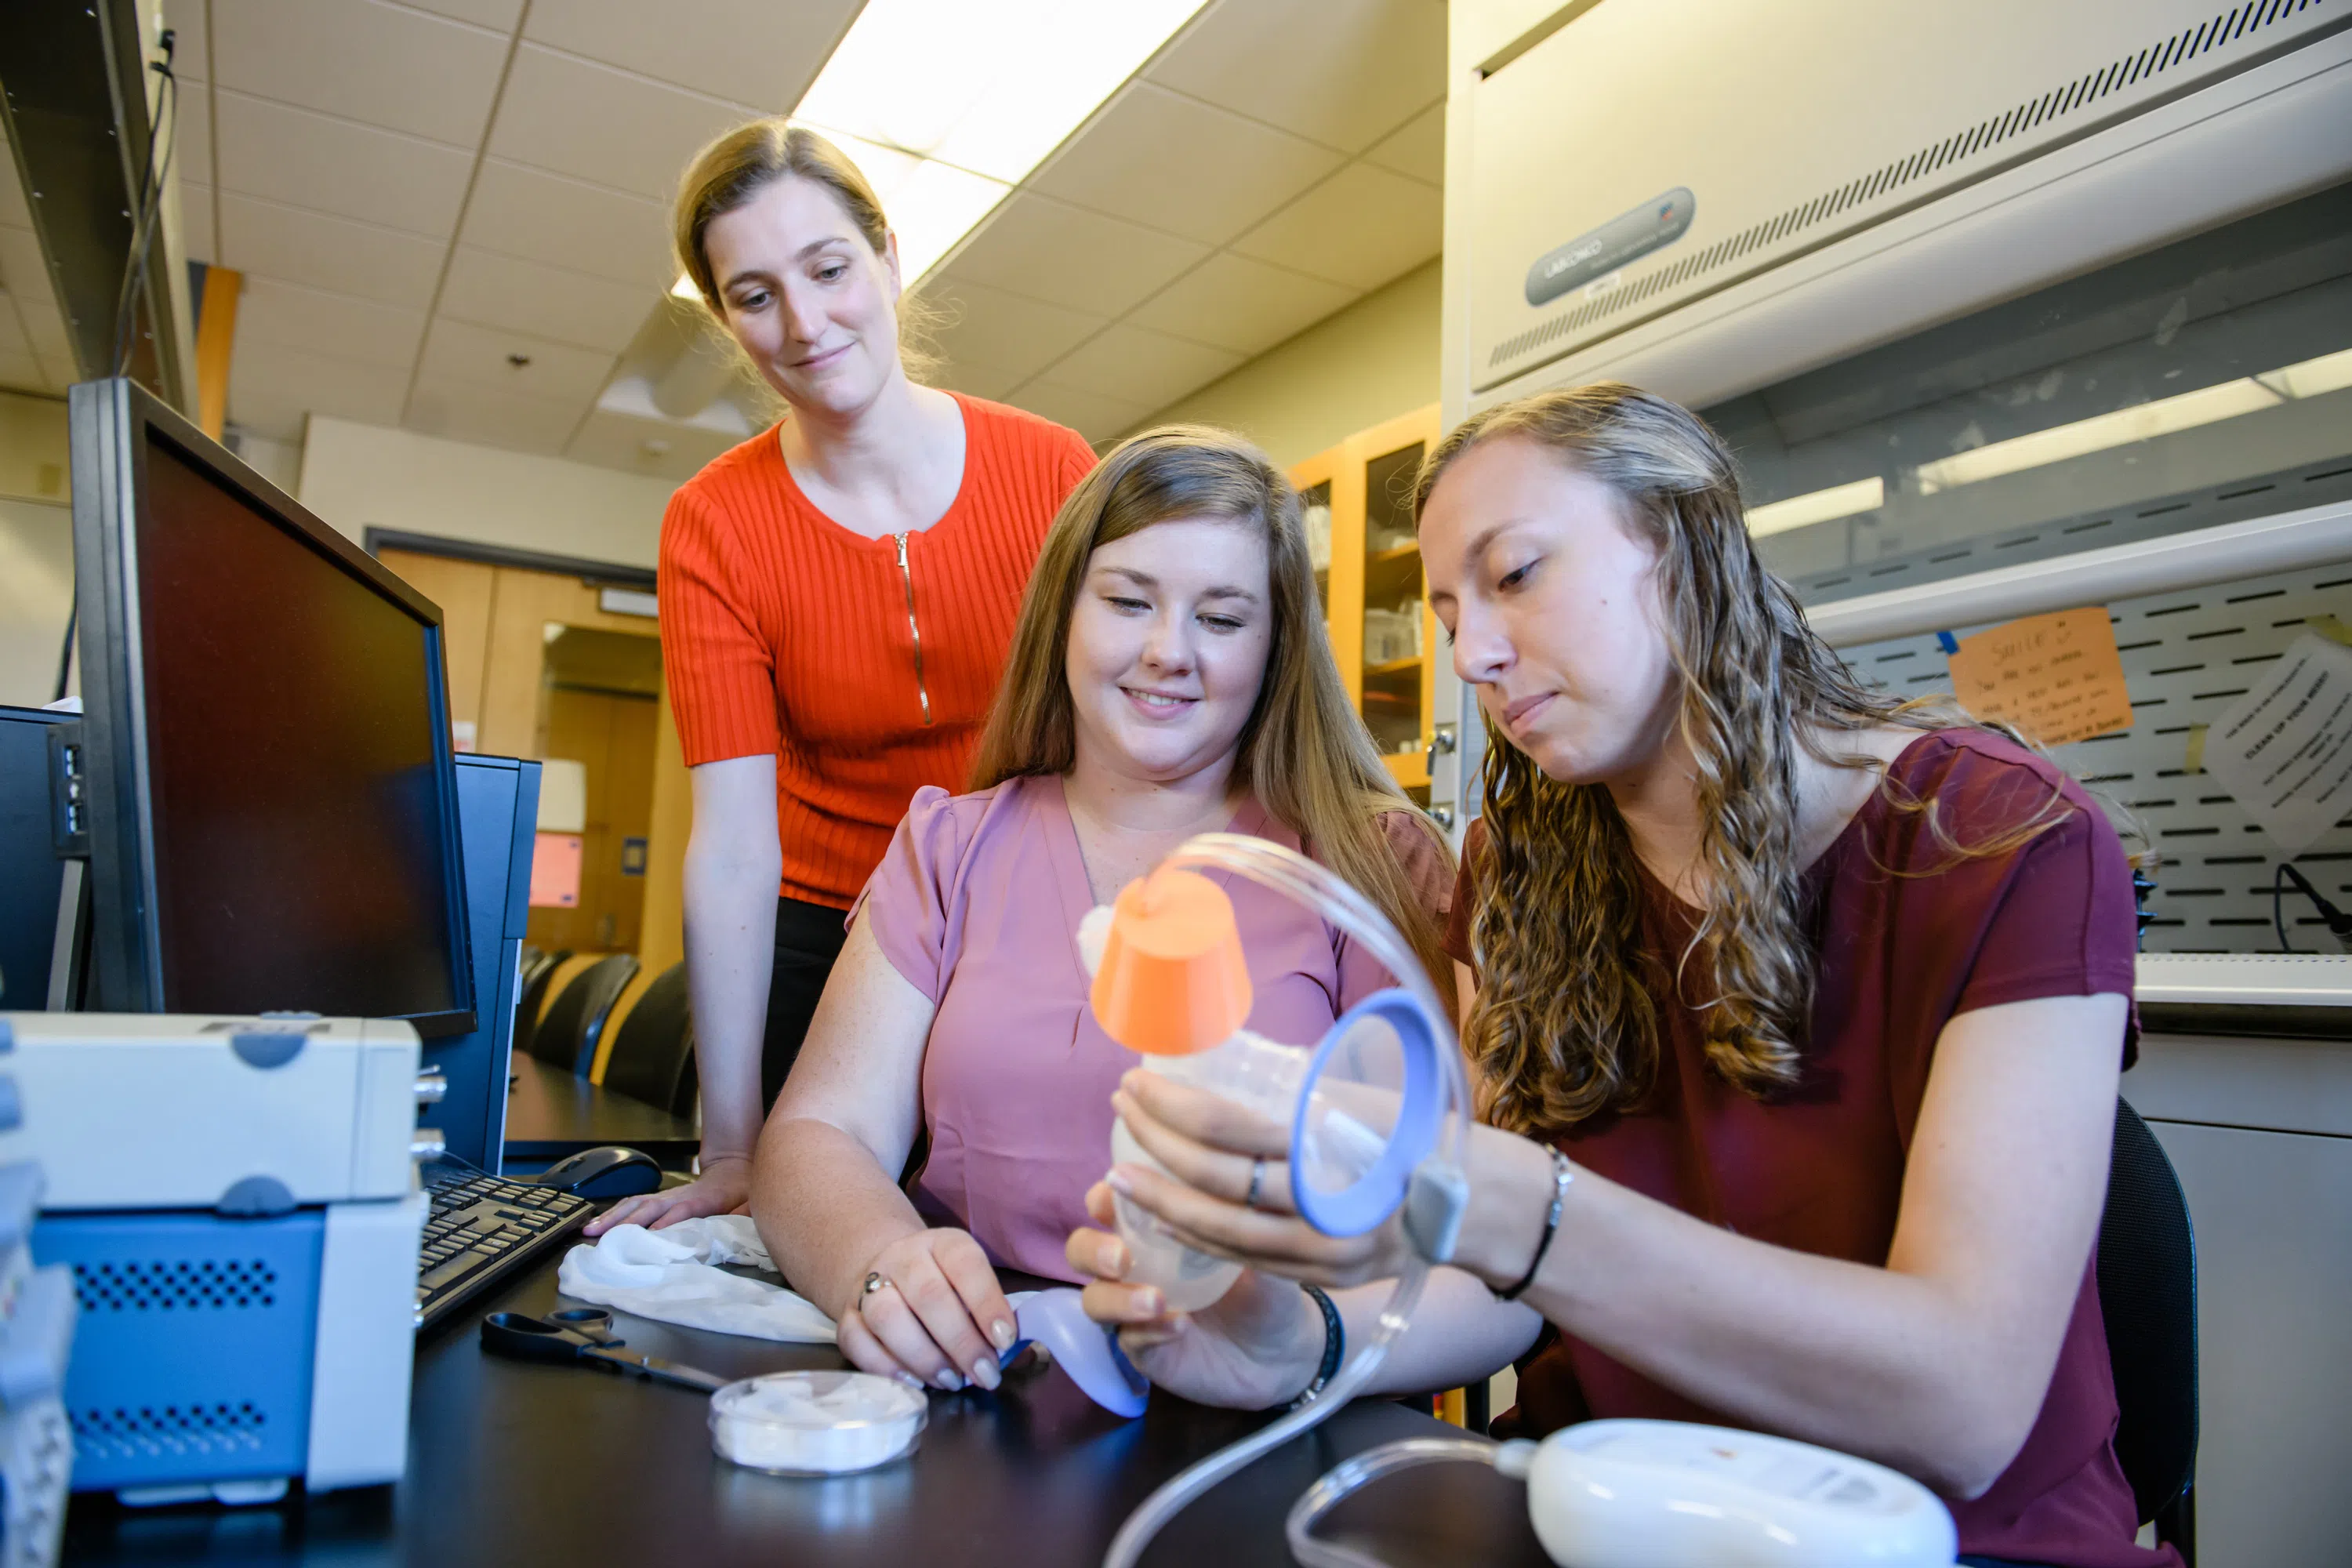 Bioengineering professor Delphine Dean works on a biomedical device with two students.